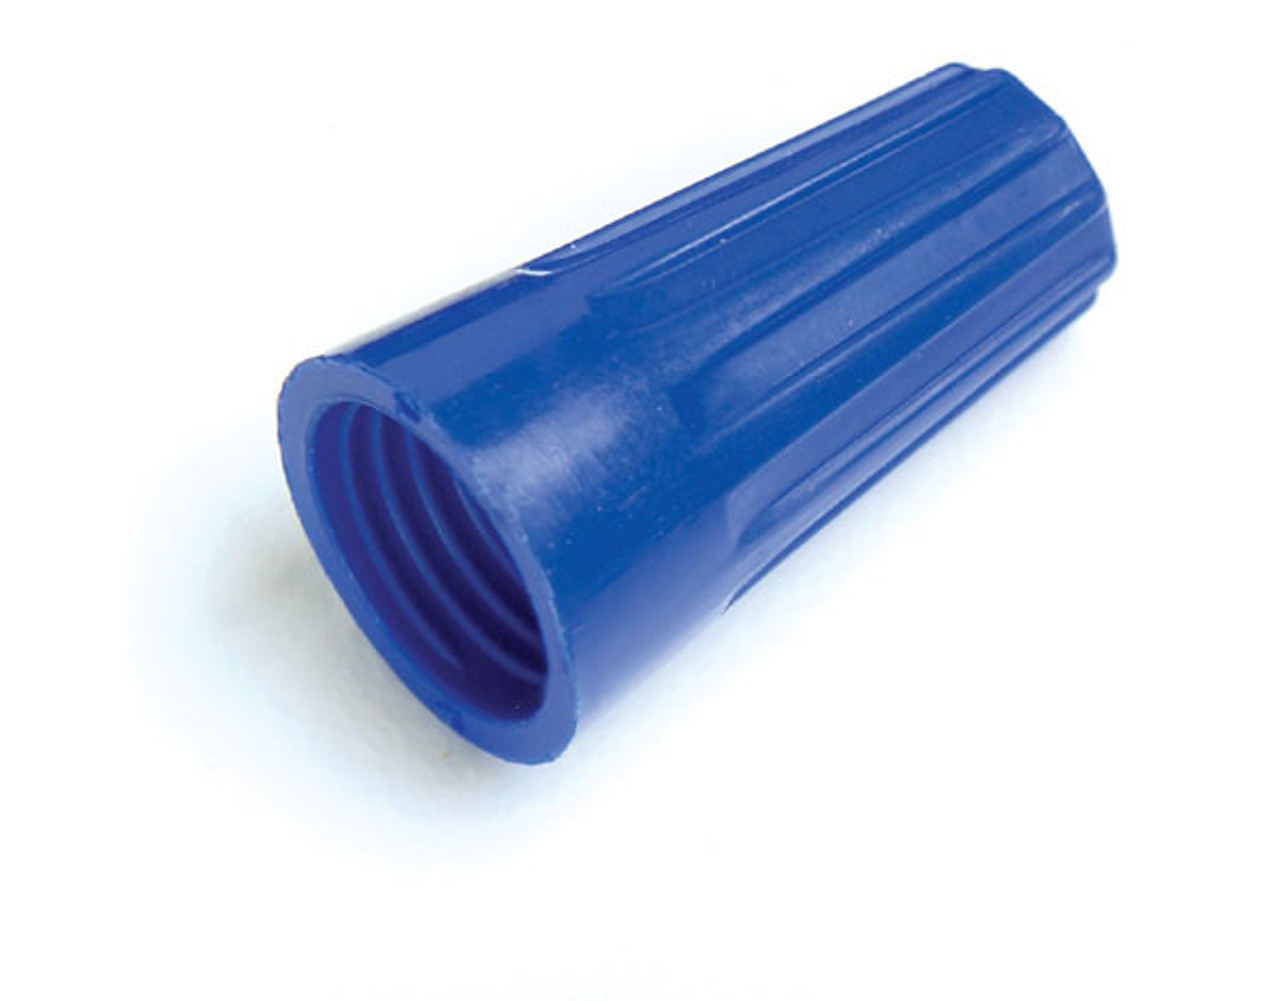 Wire Nut / Twist Connector- 22-14 GA- Blue- Pack of 15 (Grote 84-2704)